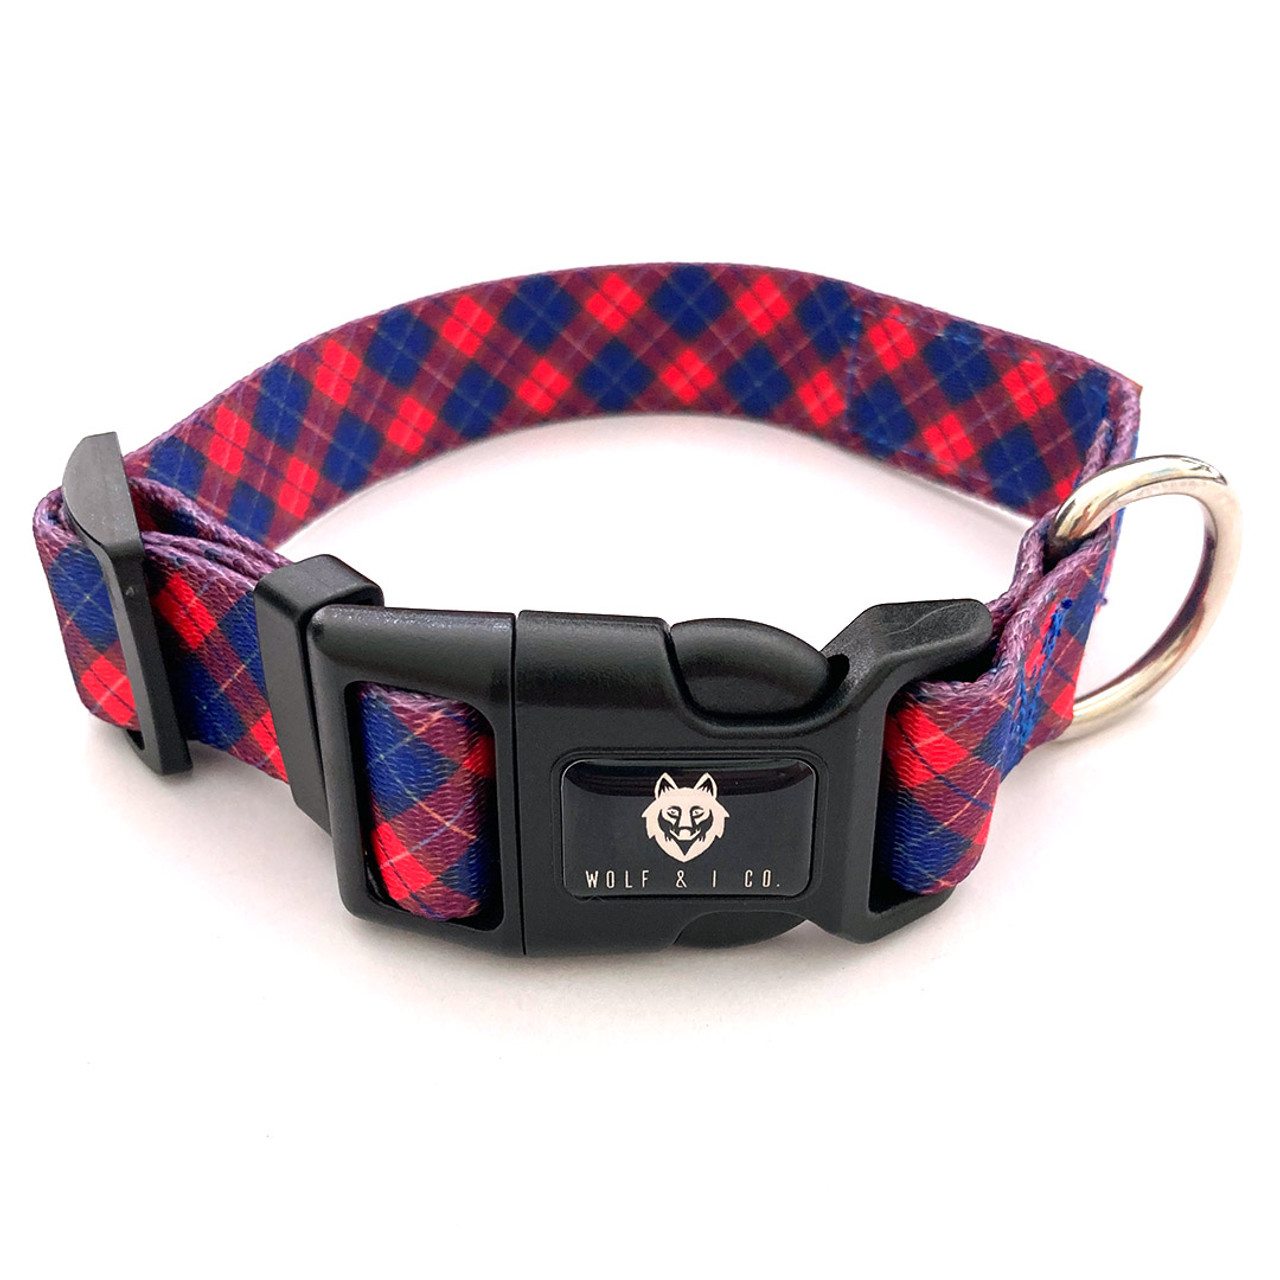 Wholesale Adjustable Nylon Pet Dog Collar with Leash Harness, Classic  Scottish Beige Plaid Pattern Designed From m.